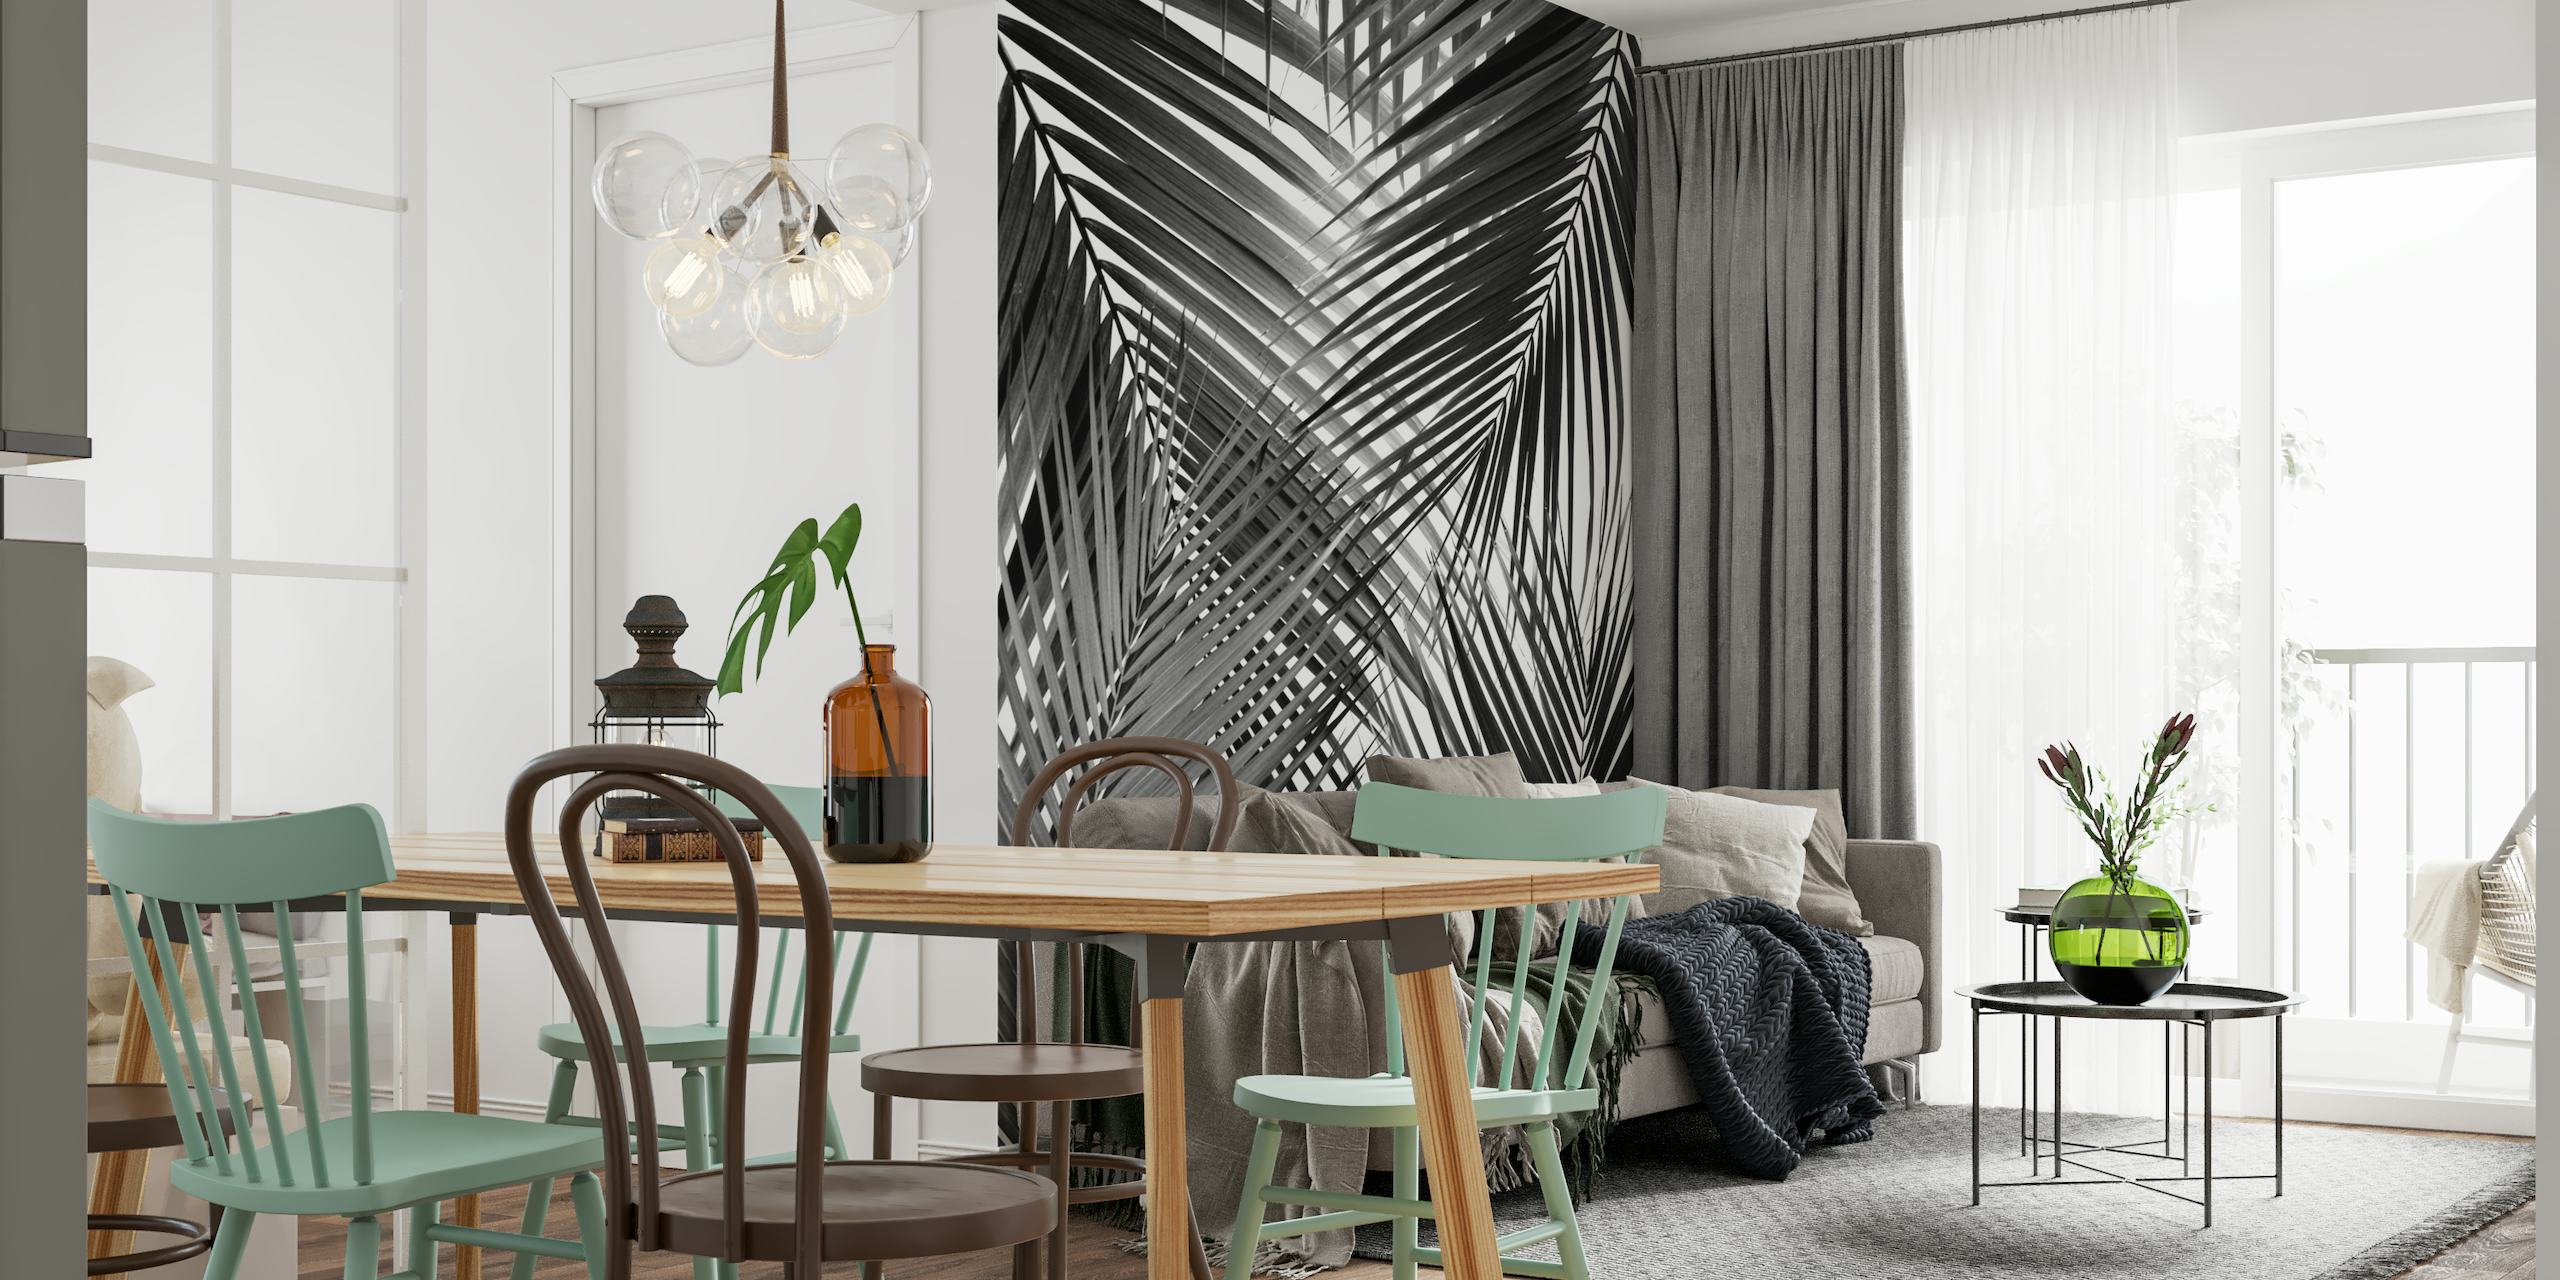 Black and white mural of abstract palm leaves design